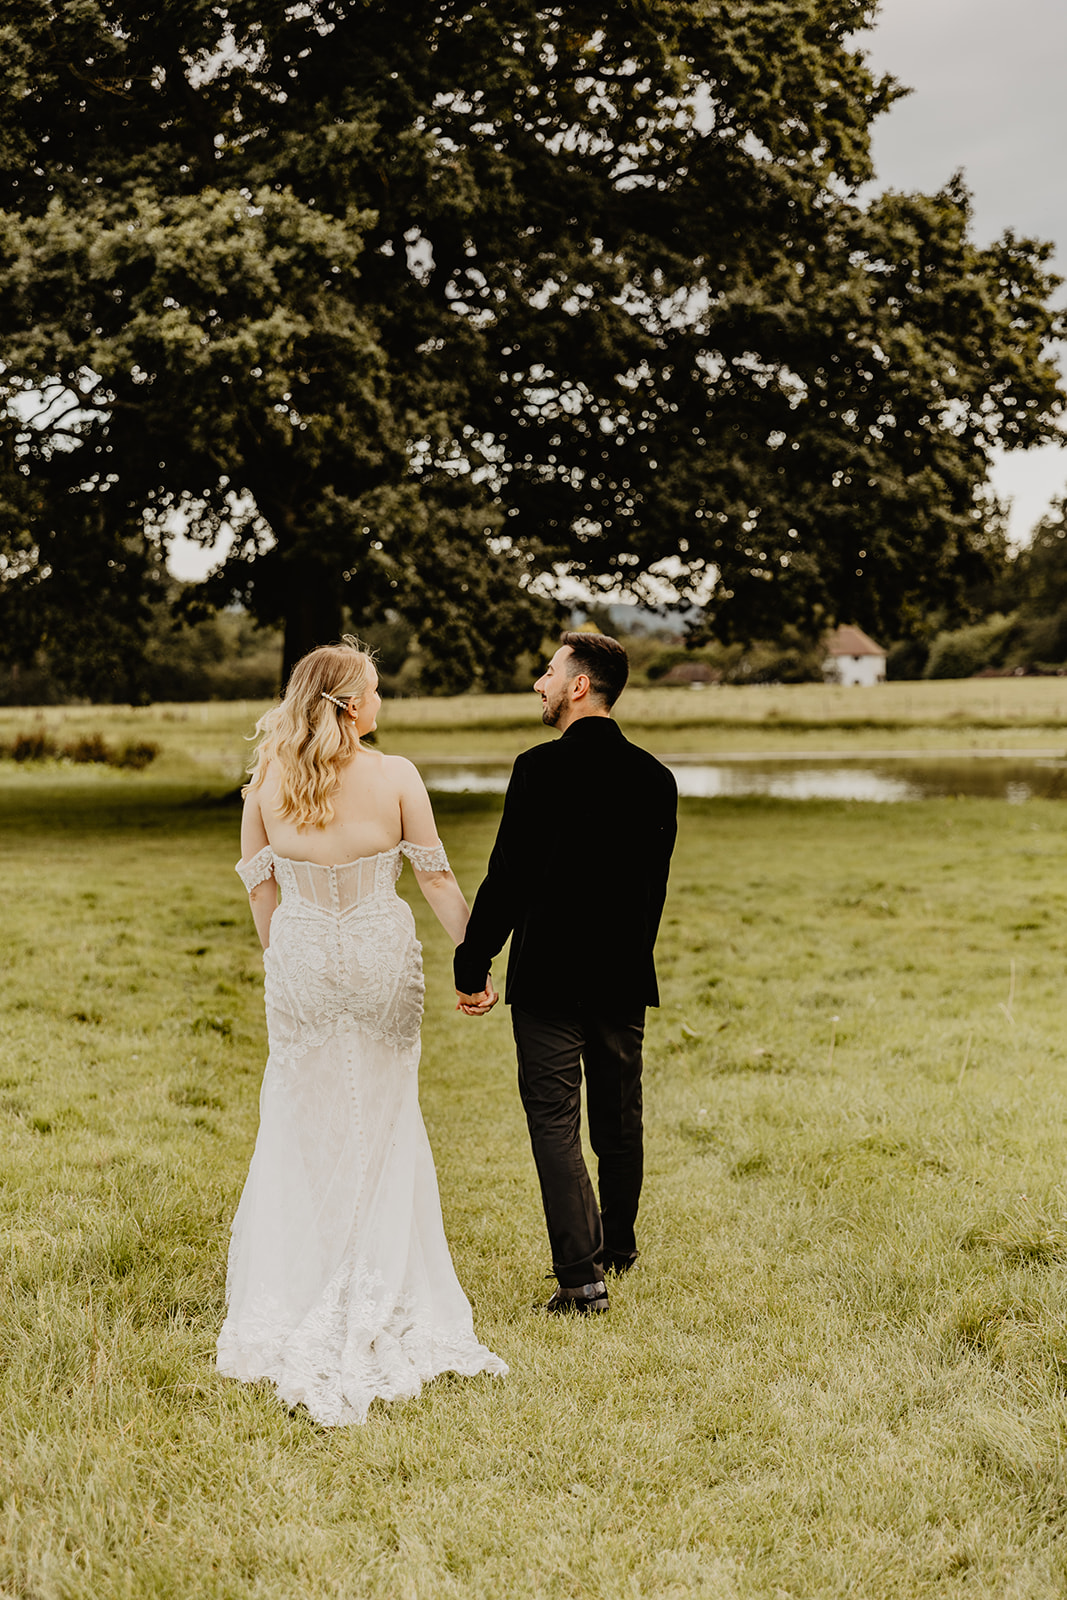 Bride and groom portraits at a Southlands barn wedding, Sussex. Photo by OliveJoy Photography.